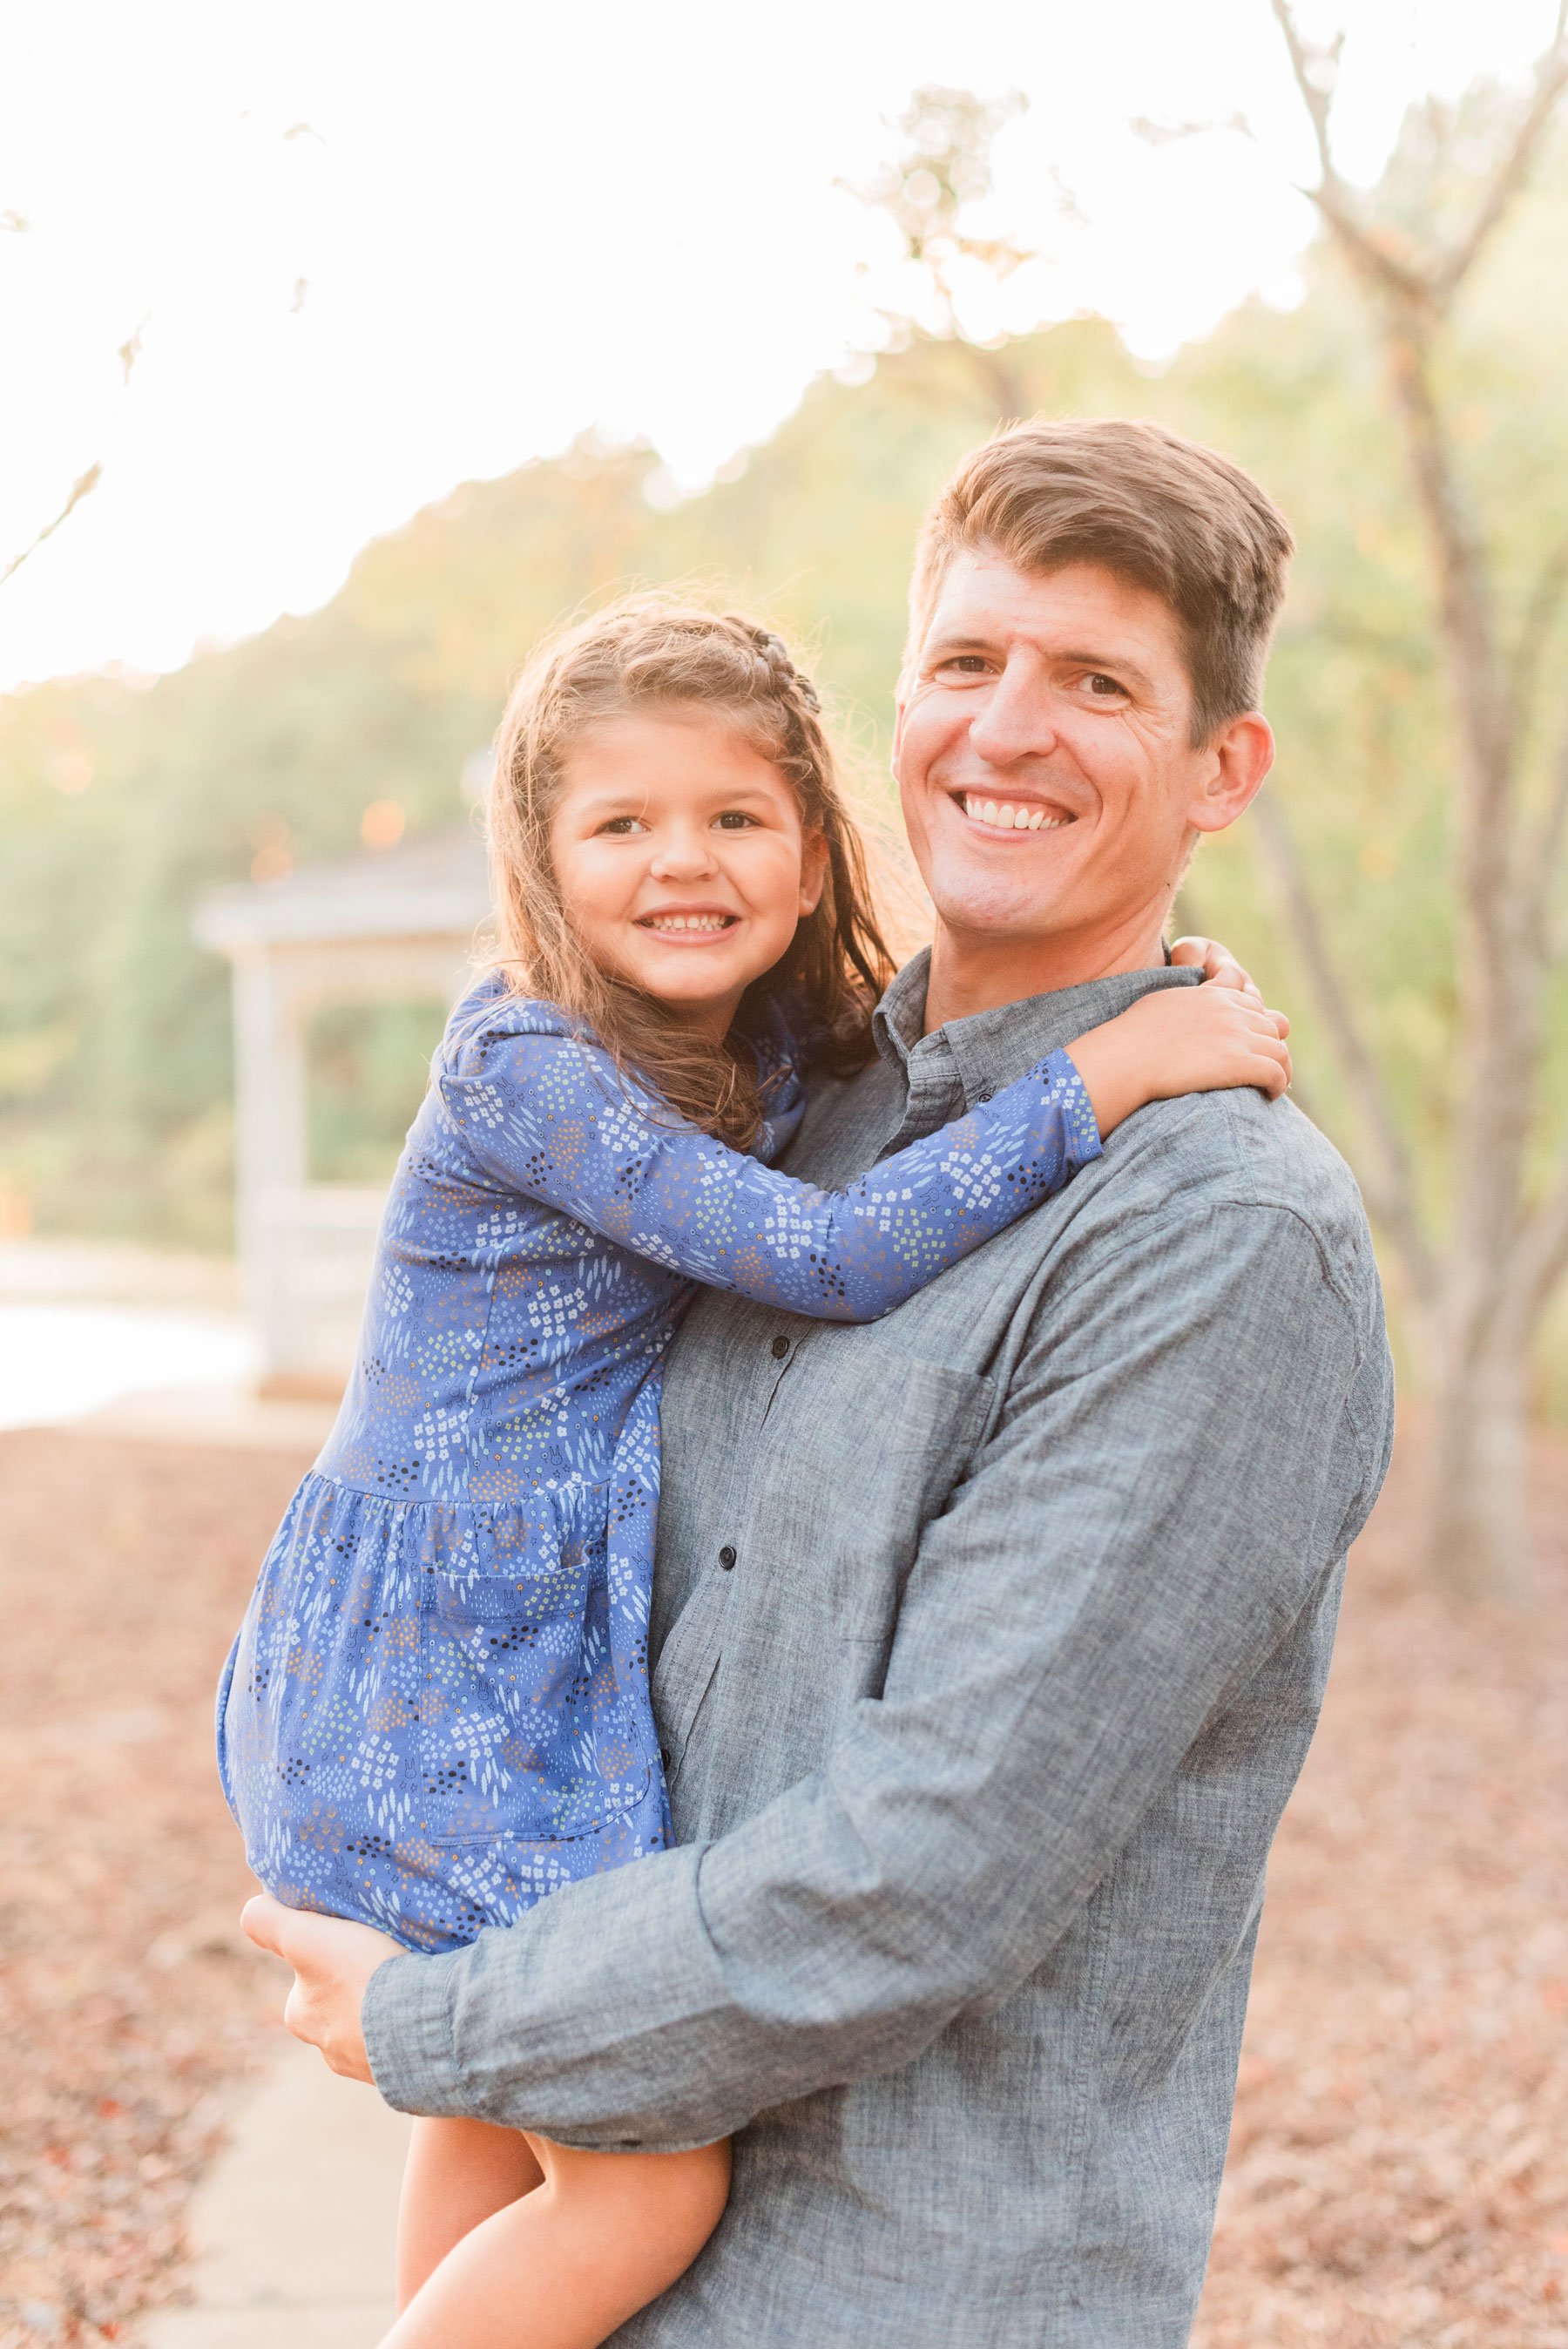    A proud dad with his spirited daughter. I love capturing these relationships. #fatherdaughterphotos #atlantafamilyphotographer #familyphotoswithkids #familyoutfitinspo #confidentkids #kidsselfesteem # confidencetips #georgiafamilyphotos #georgiaph